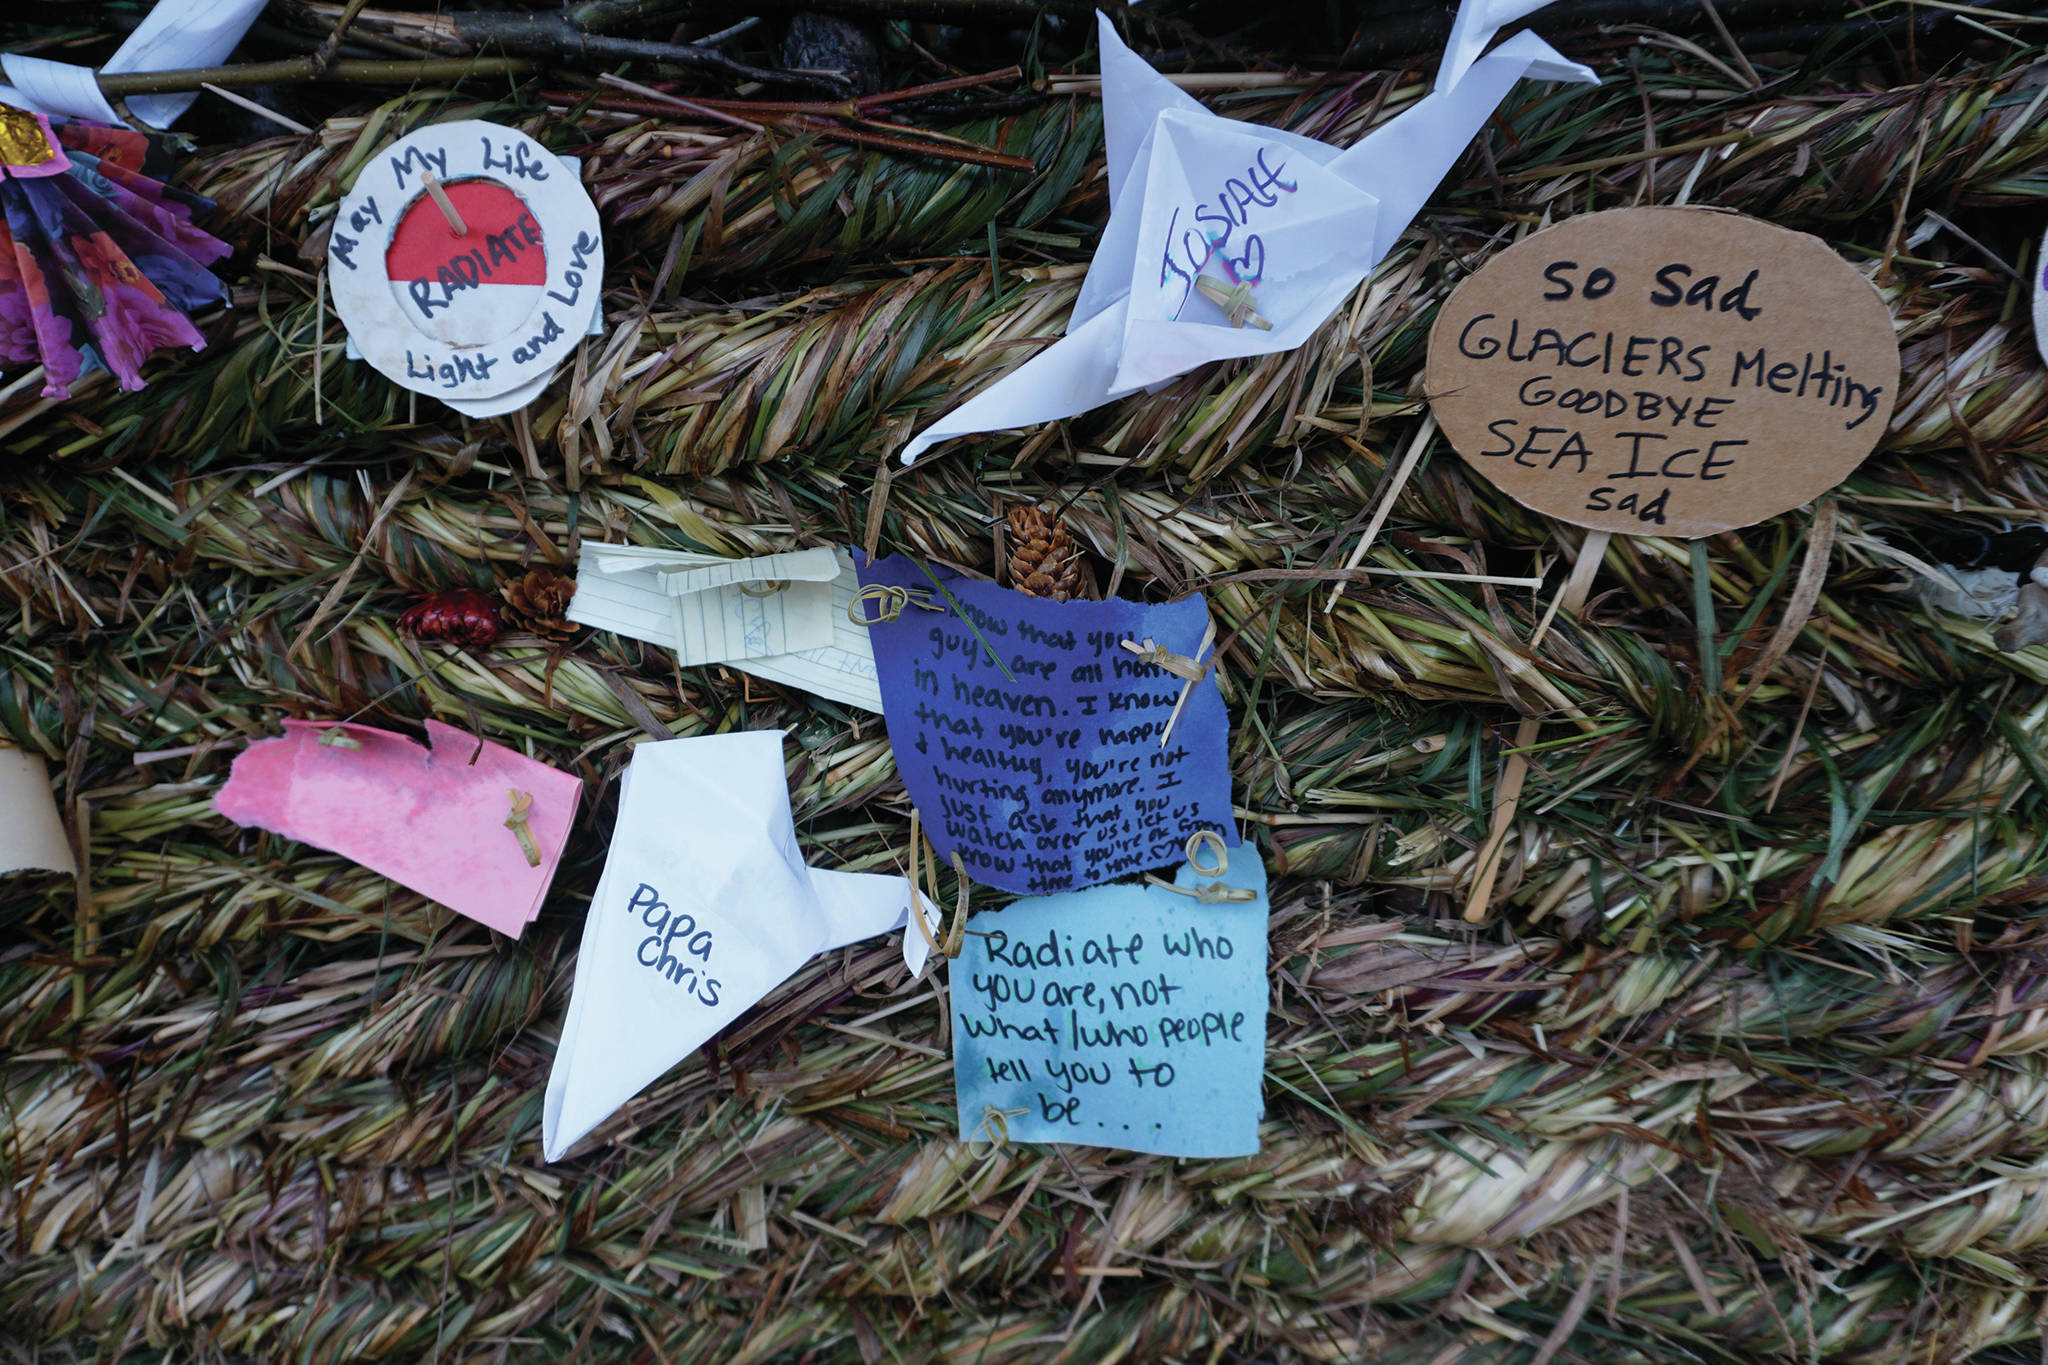 Some of the messages on “Radiate,” the 16th annual Burning Basket. The basket was burned on Sunday night, Sept. 15, 2019, at Mariner Park on the Homer Spit in Homer, Alaska. (Photo by Michael Armstrong/Homer News)